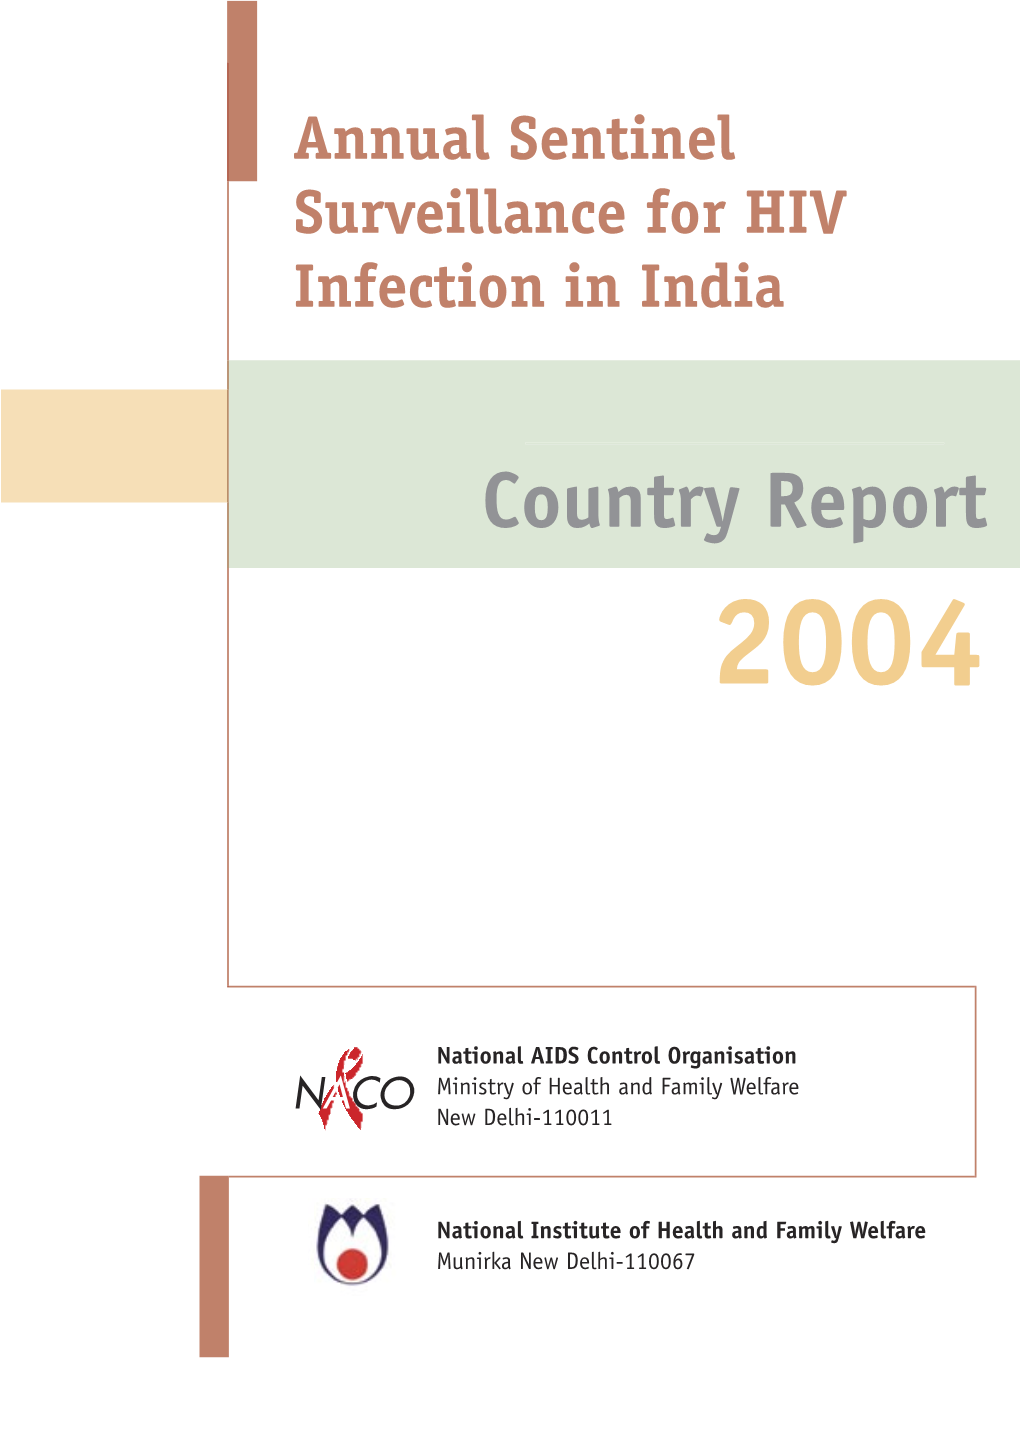 View HIV Sentinel Surveillance 2004 Country Report